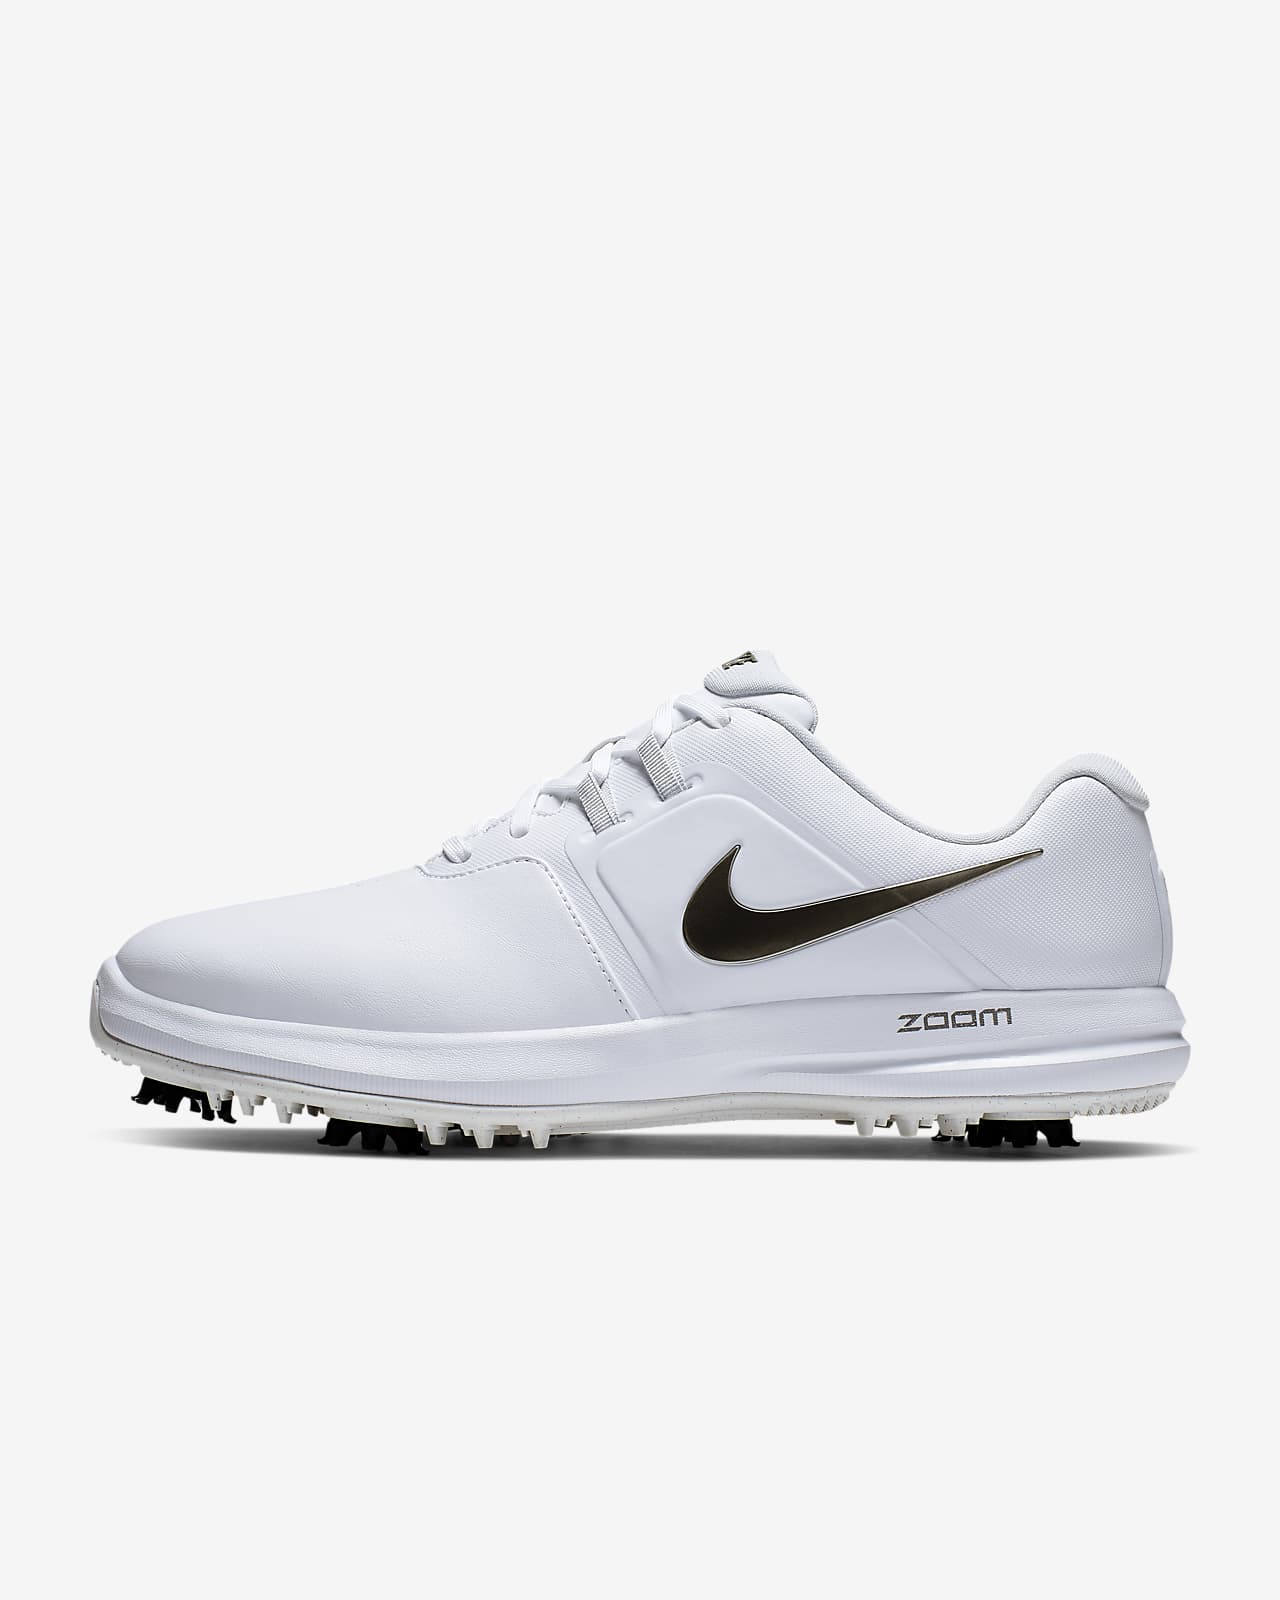 Golf Shoes Nike Mens : Shop Nike Golf Shoes Golf Galaxy - The right ...